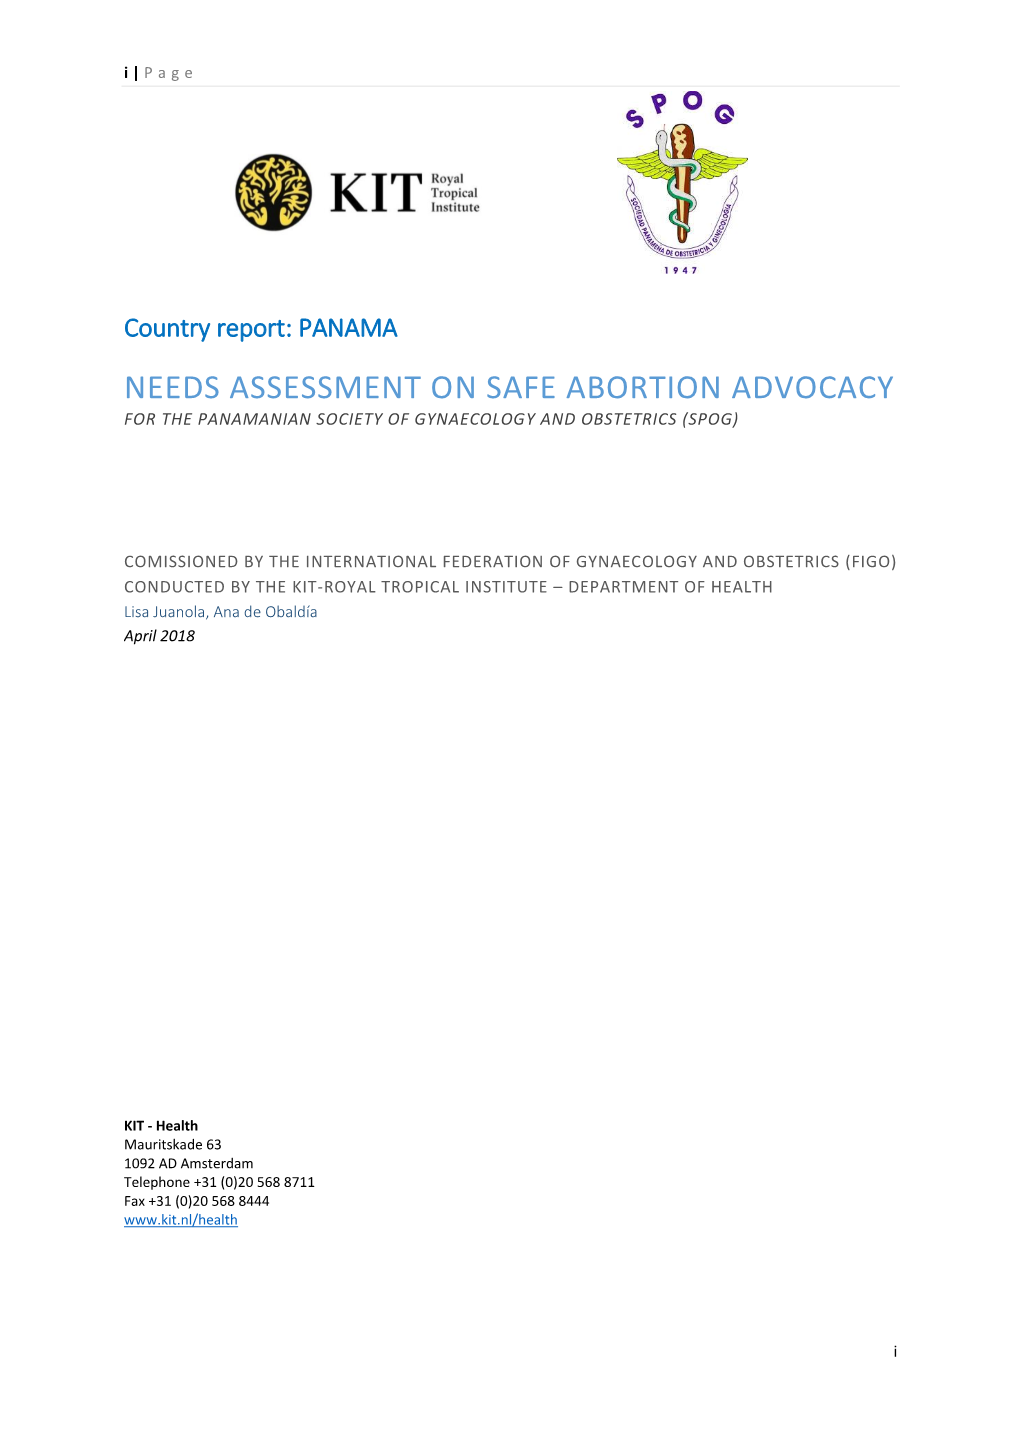 Panama Needs Assessment on Safe Abortion Advocacy for the Panamanian Society of Gynaecology and Obstetrics (Spog)